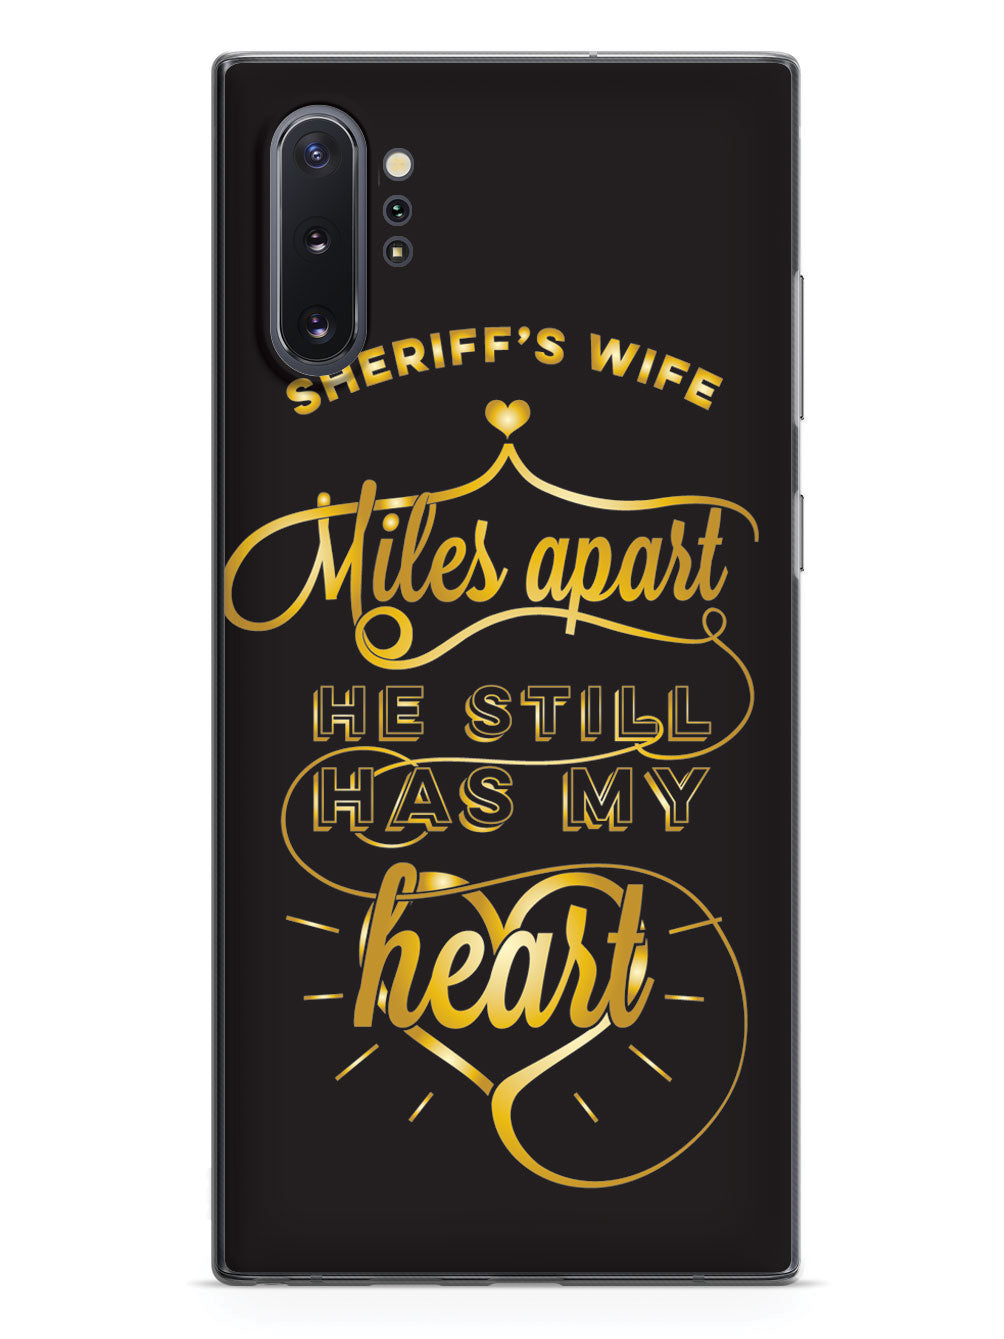 Sheriff's Wife - Miles Apart, Still Has My Heart Case